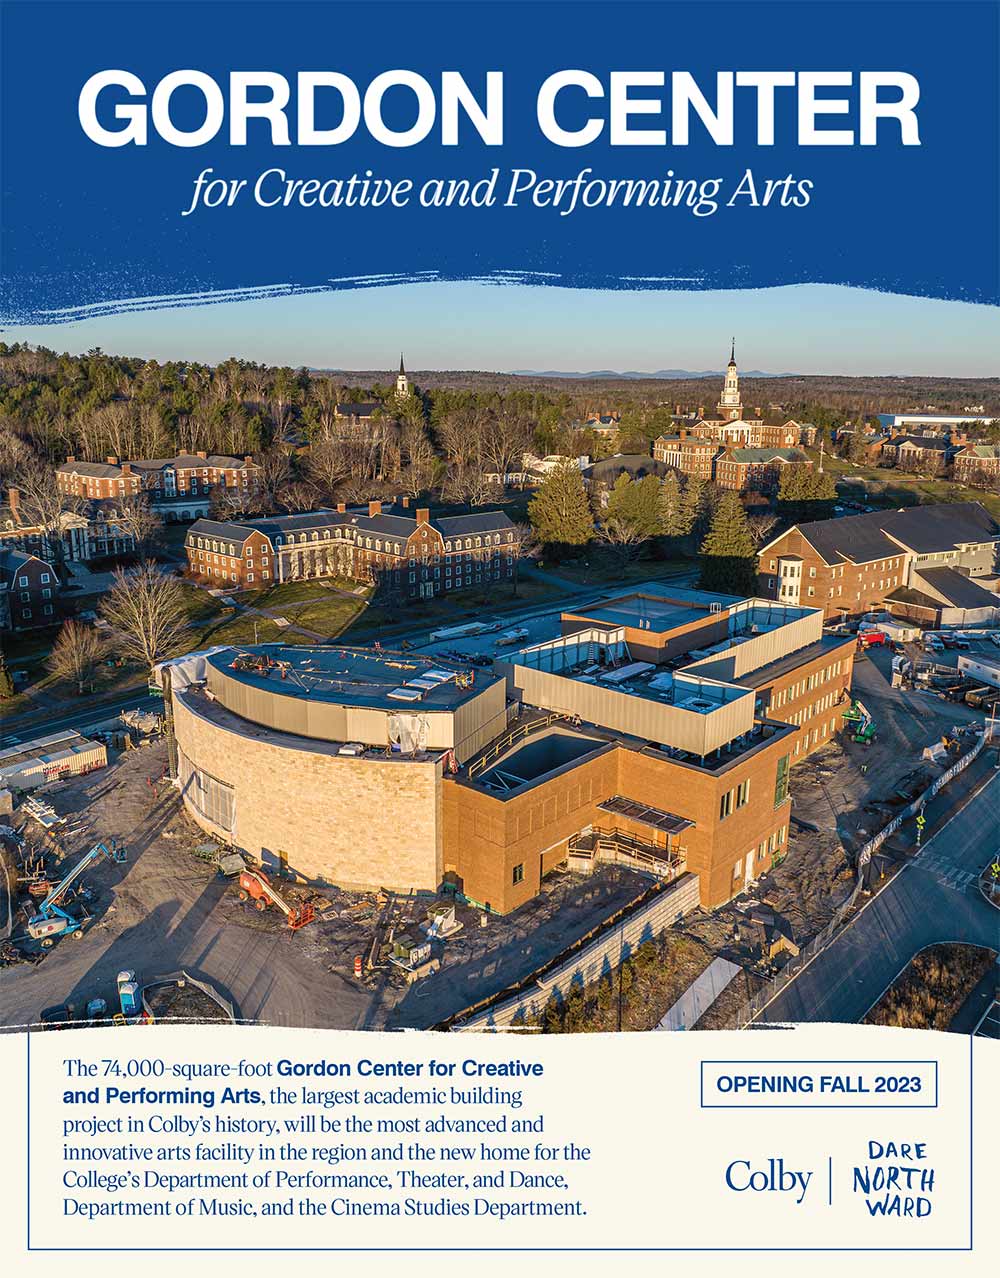 Gordon Center for Creative and Performing Arts Advertisement